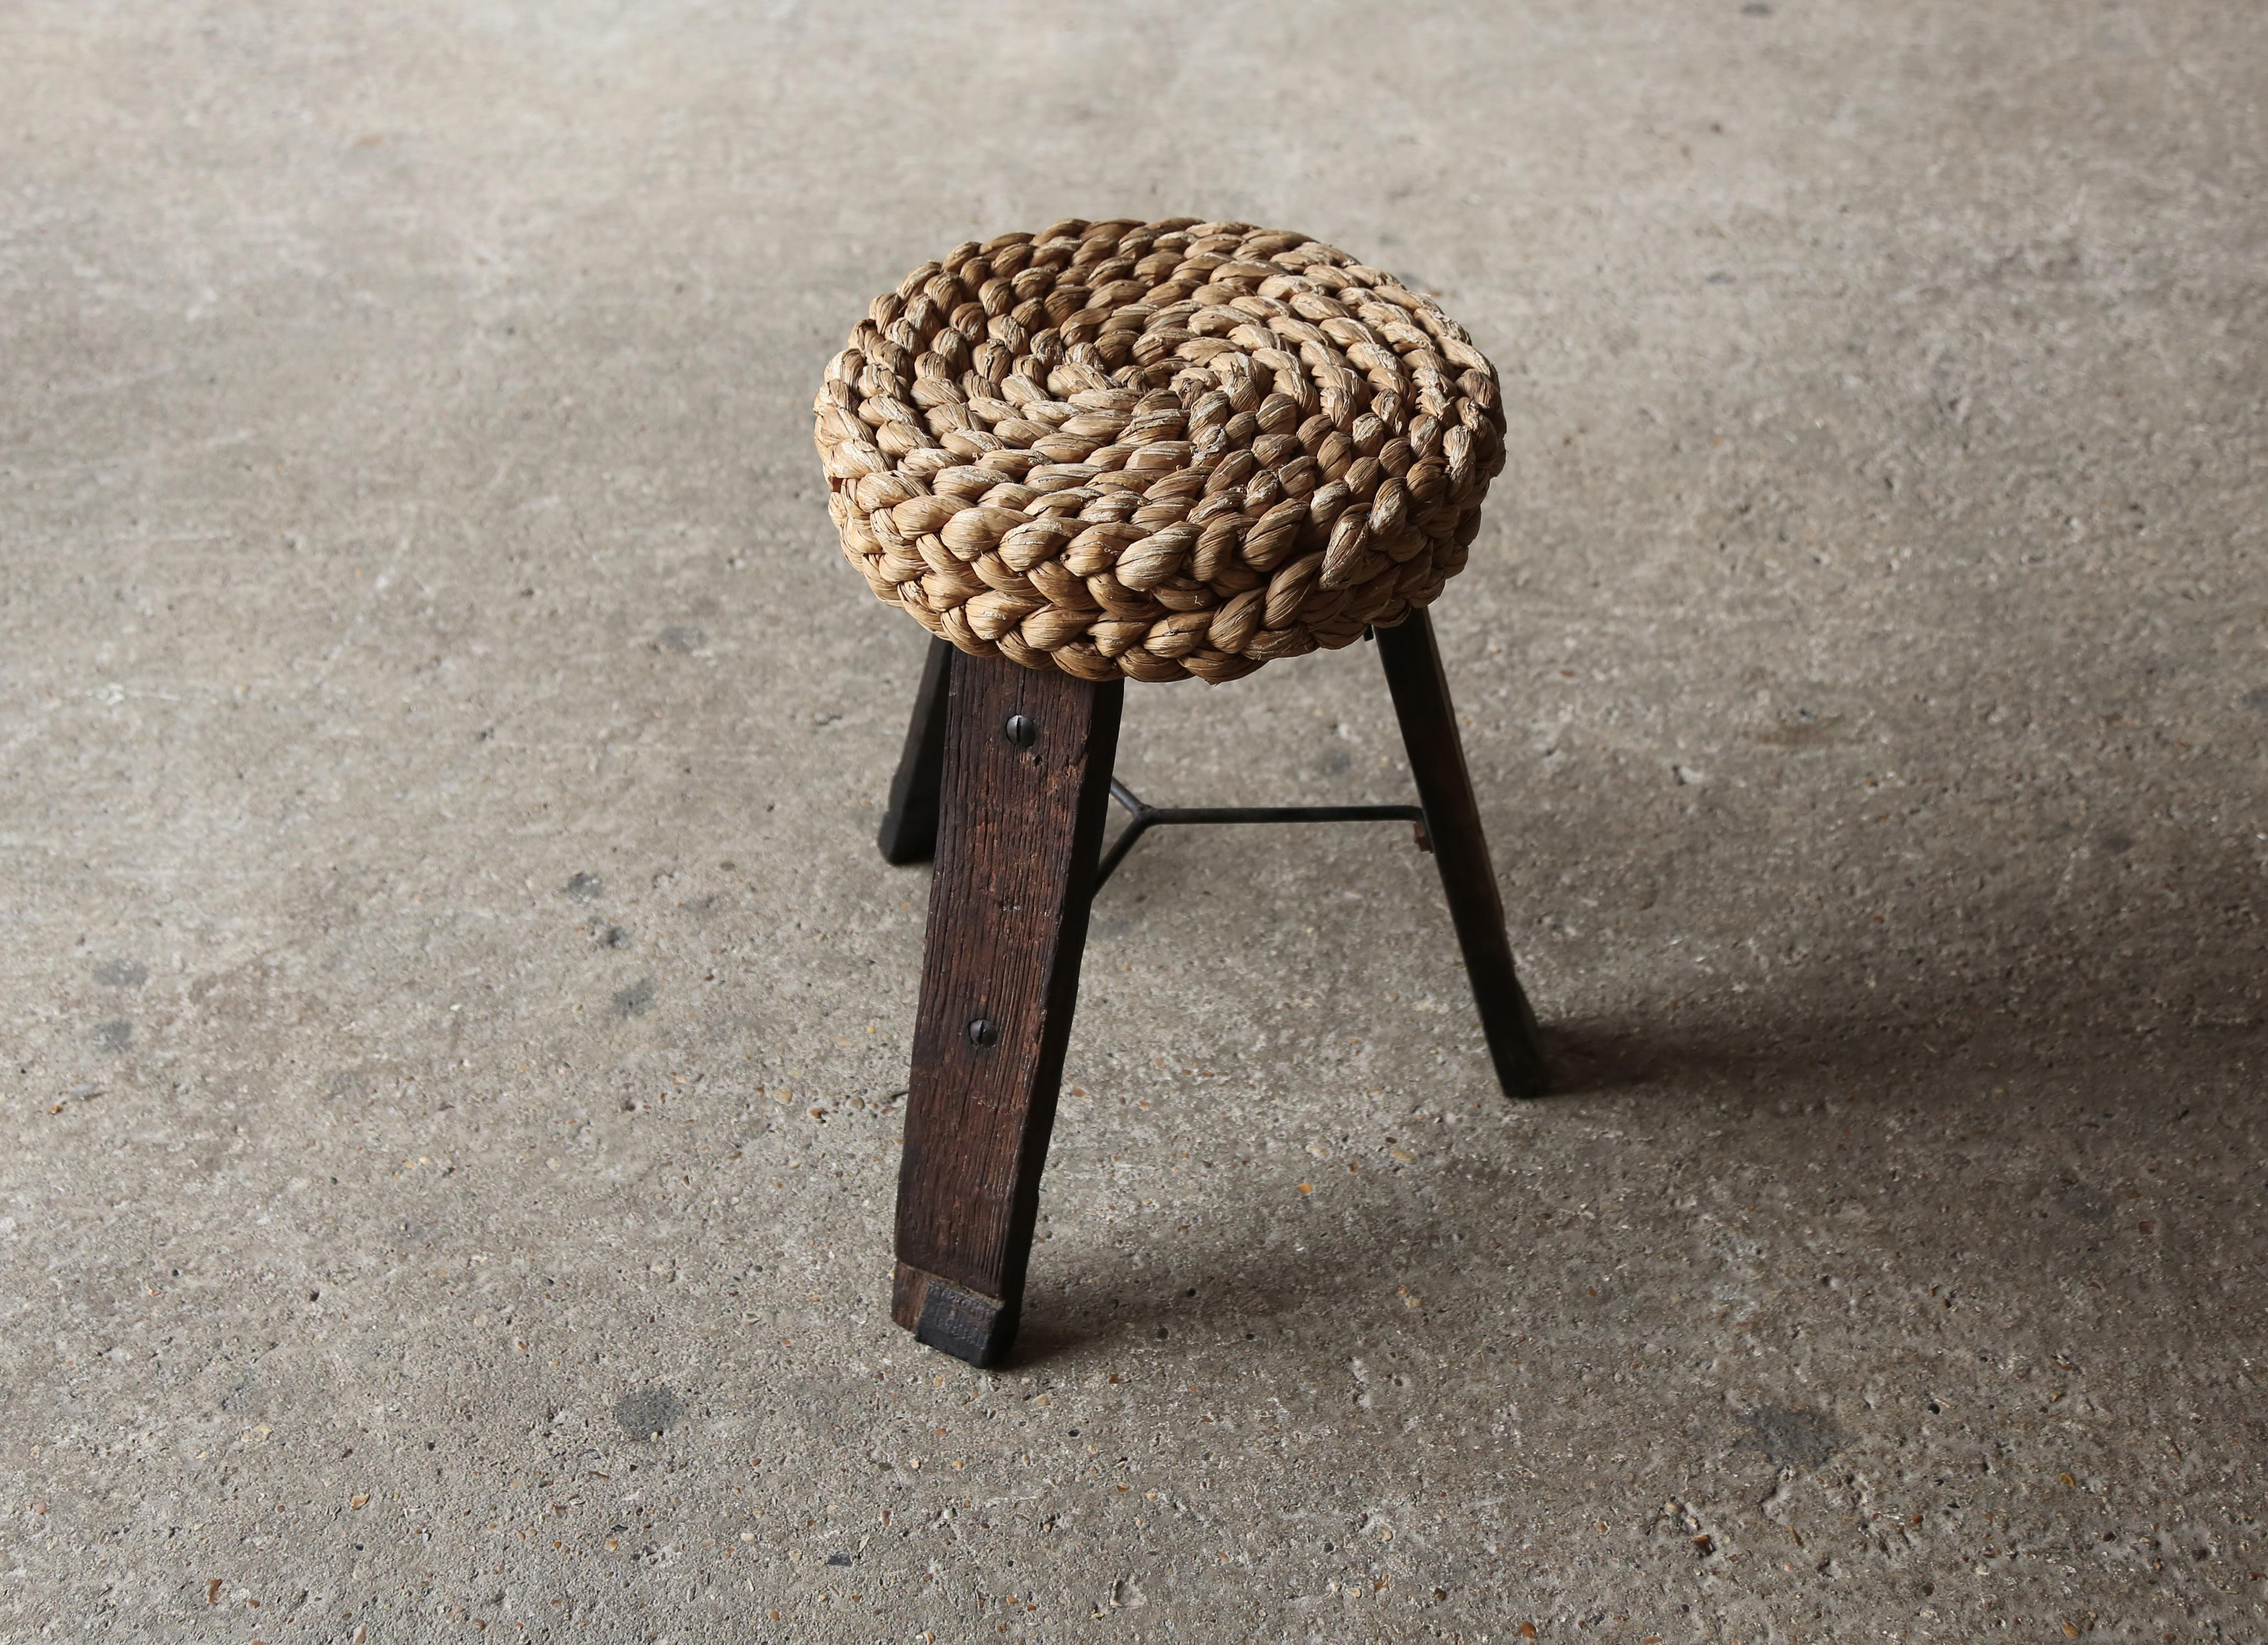 Audoux & Minet Tripod Rope Stool, France, 1950s For Sale 2